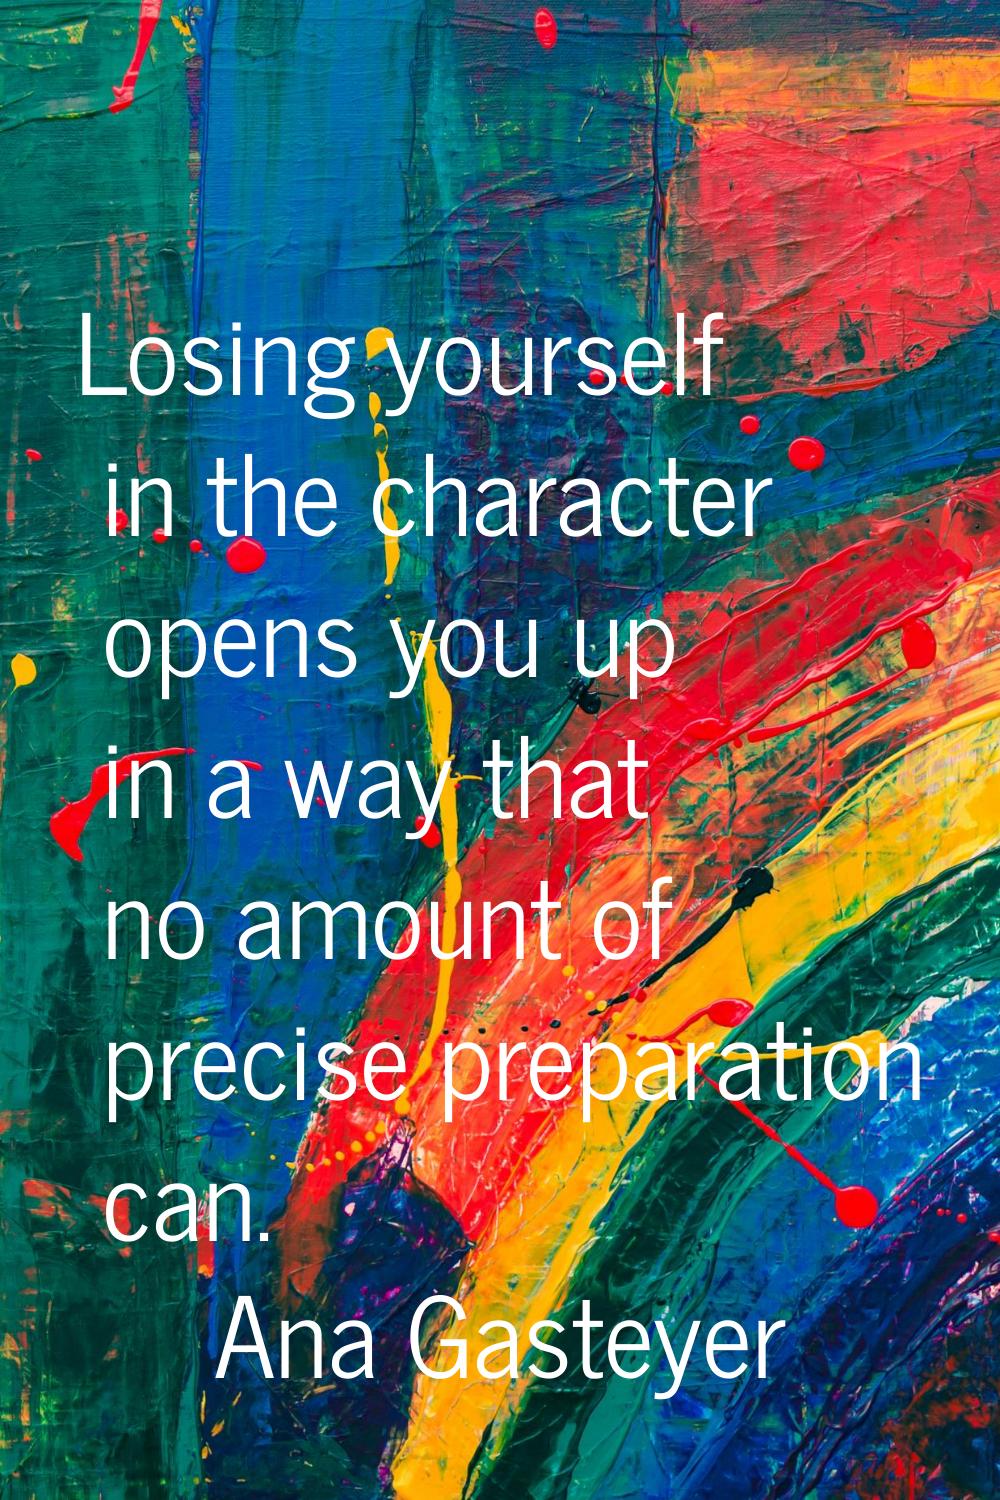 Losing yourself in the character opens you up in a way that no amount of precise preparation can.